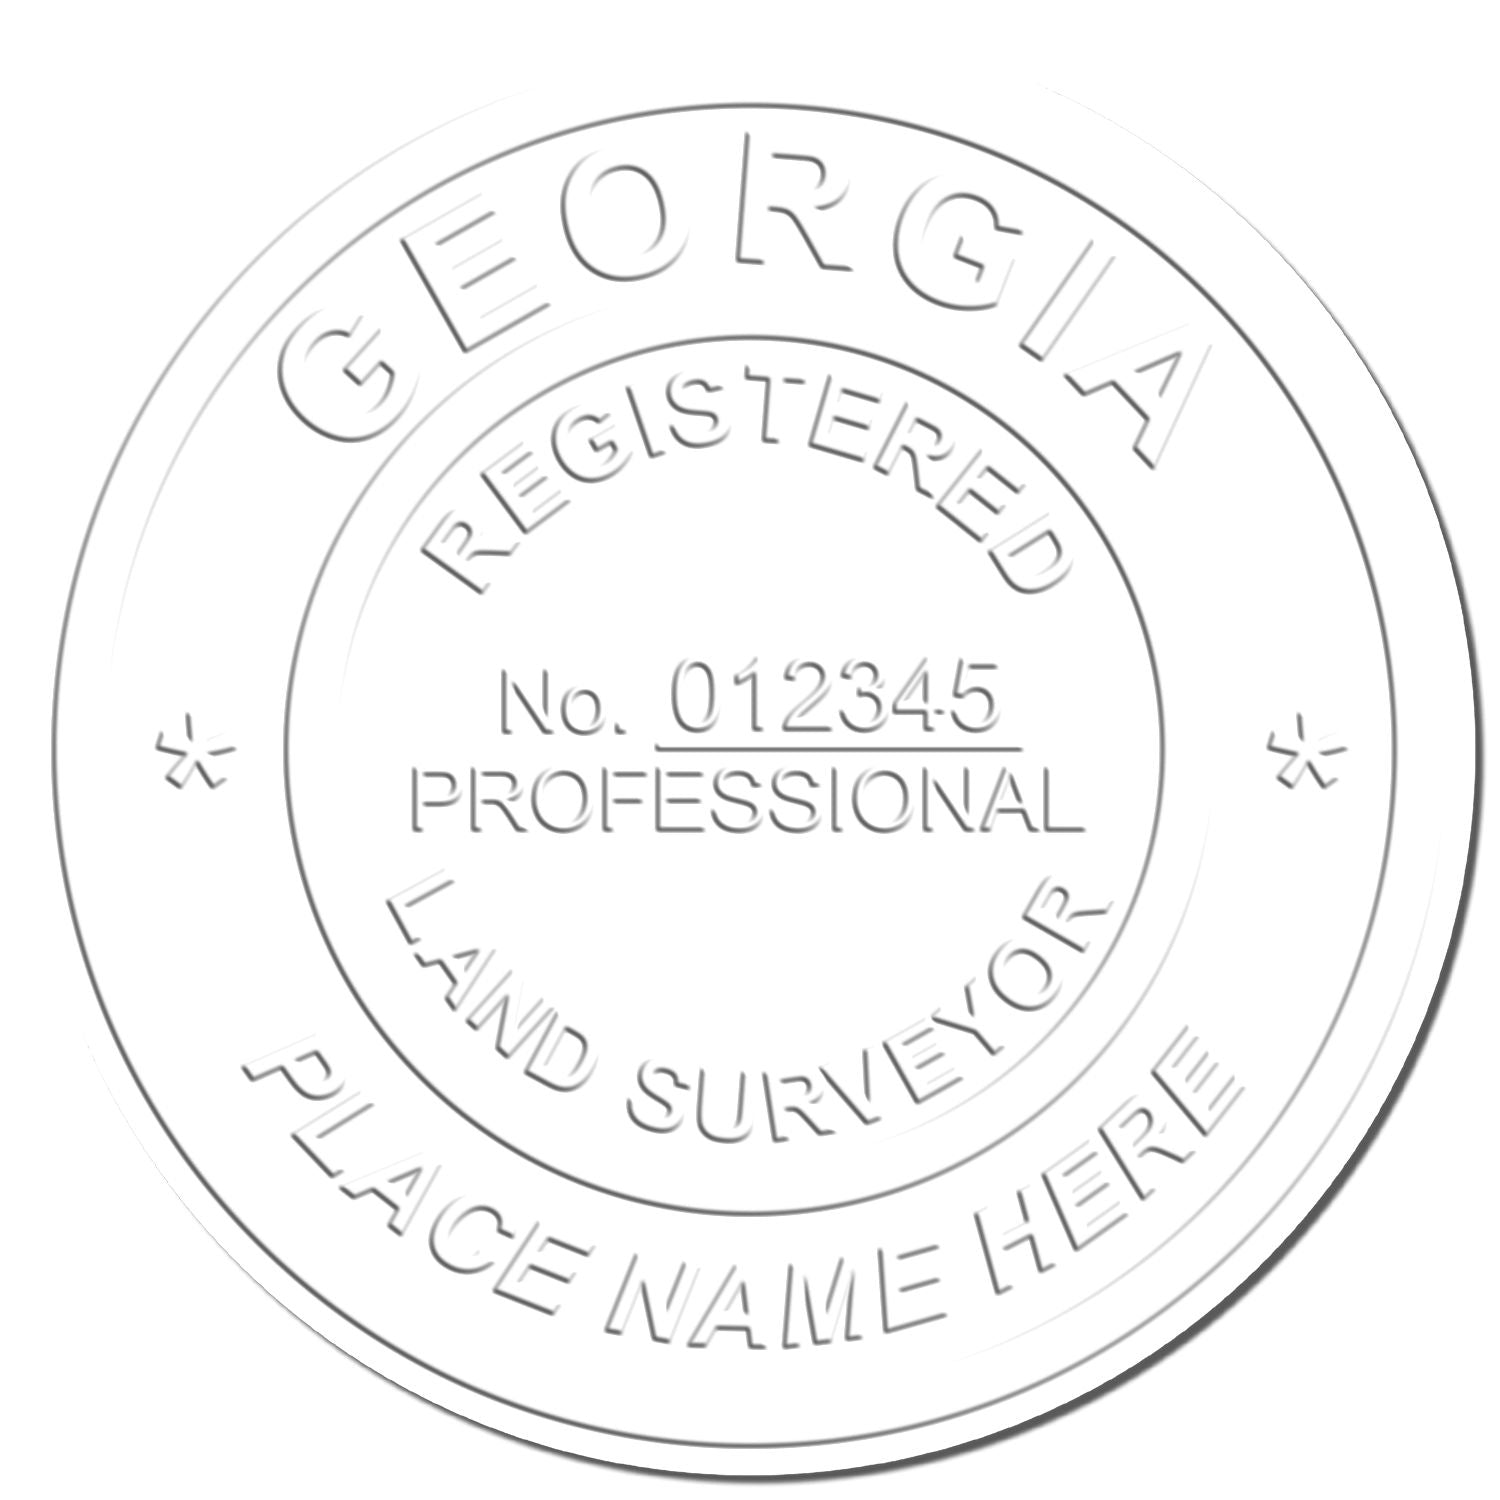 The main image for the Long Reach Georgia Land Surveyor Seal depicting a sample of the imprint and electronic files